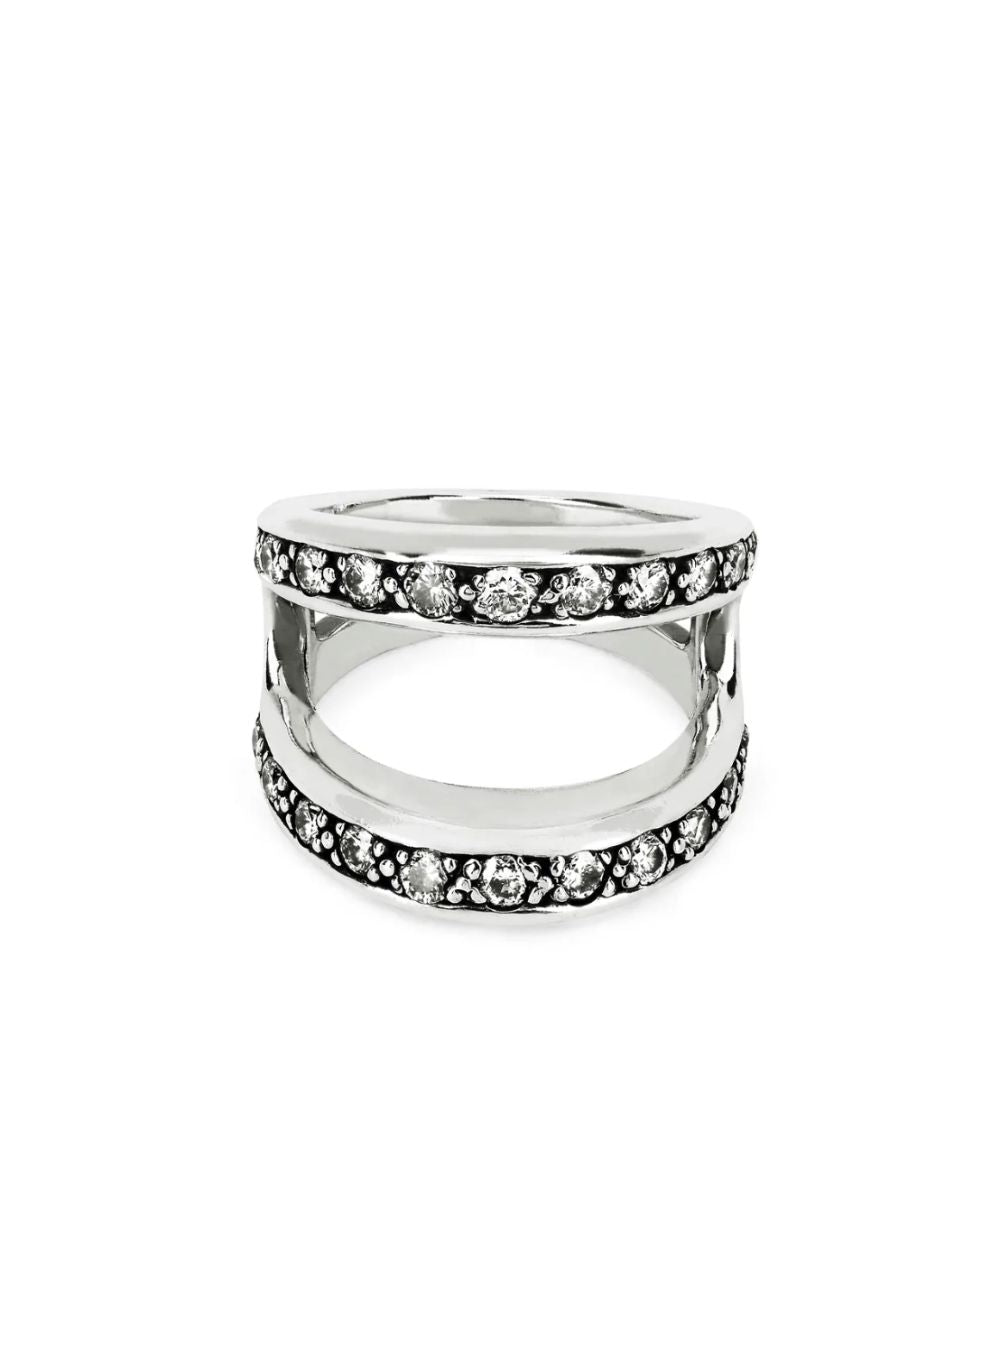 HOORSENBUHS | Masque Ring with White Diamonds in Sterling Silver